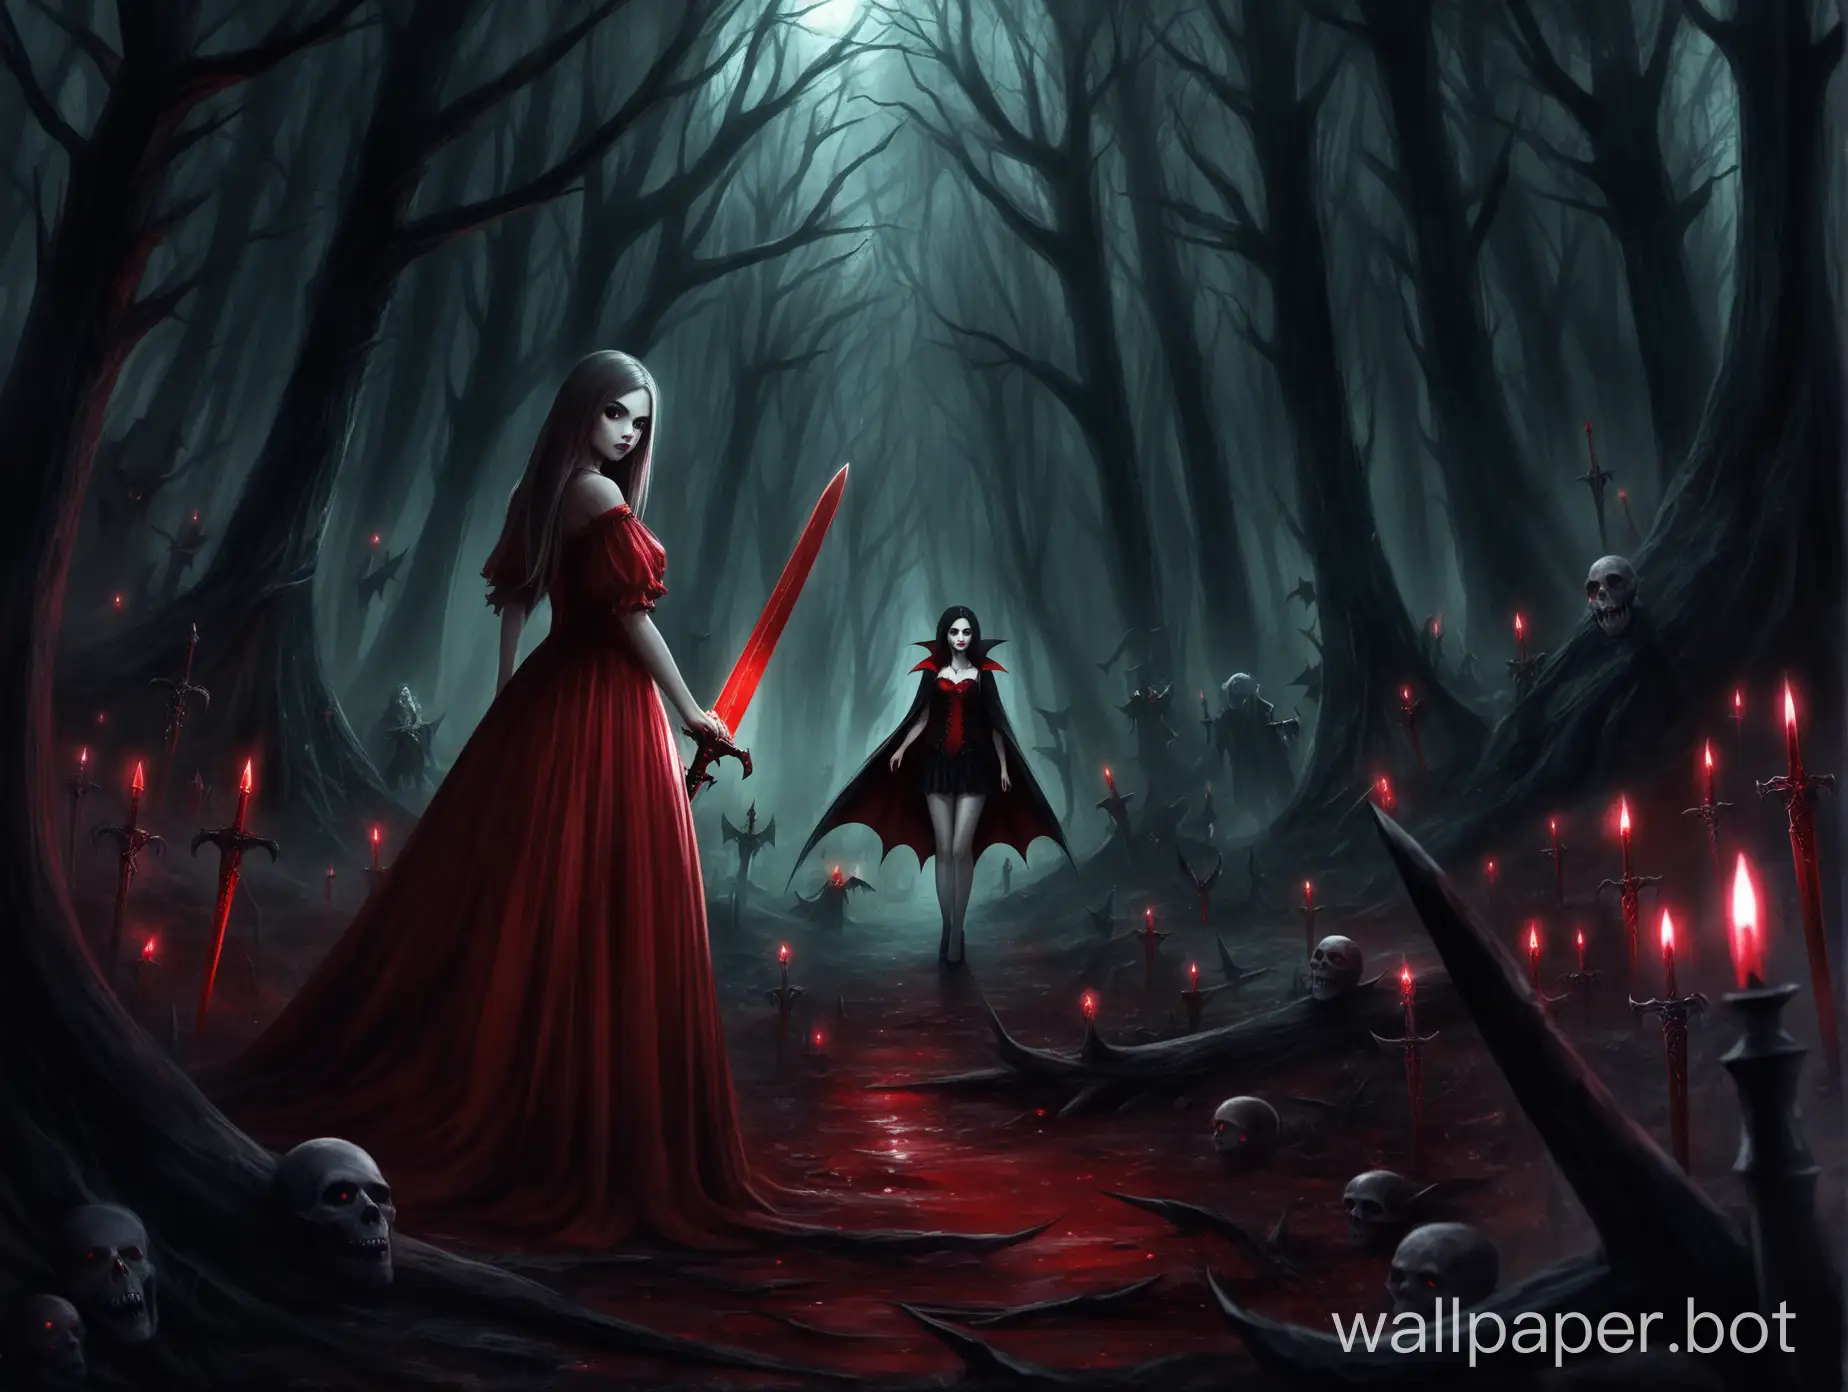 dark fantasy world, a vampire girl far in the background with red shiny sword, shes in the dark magic forest